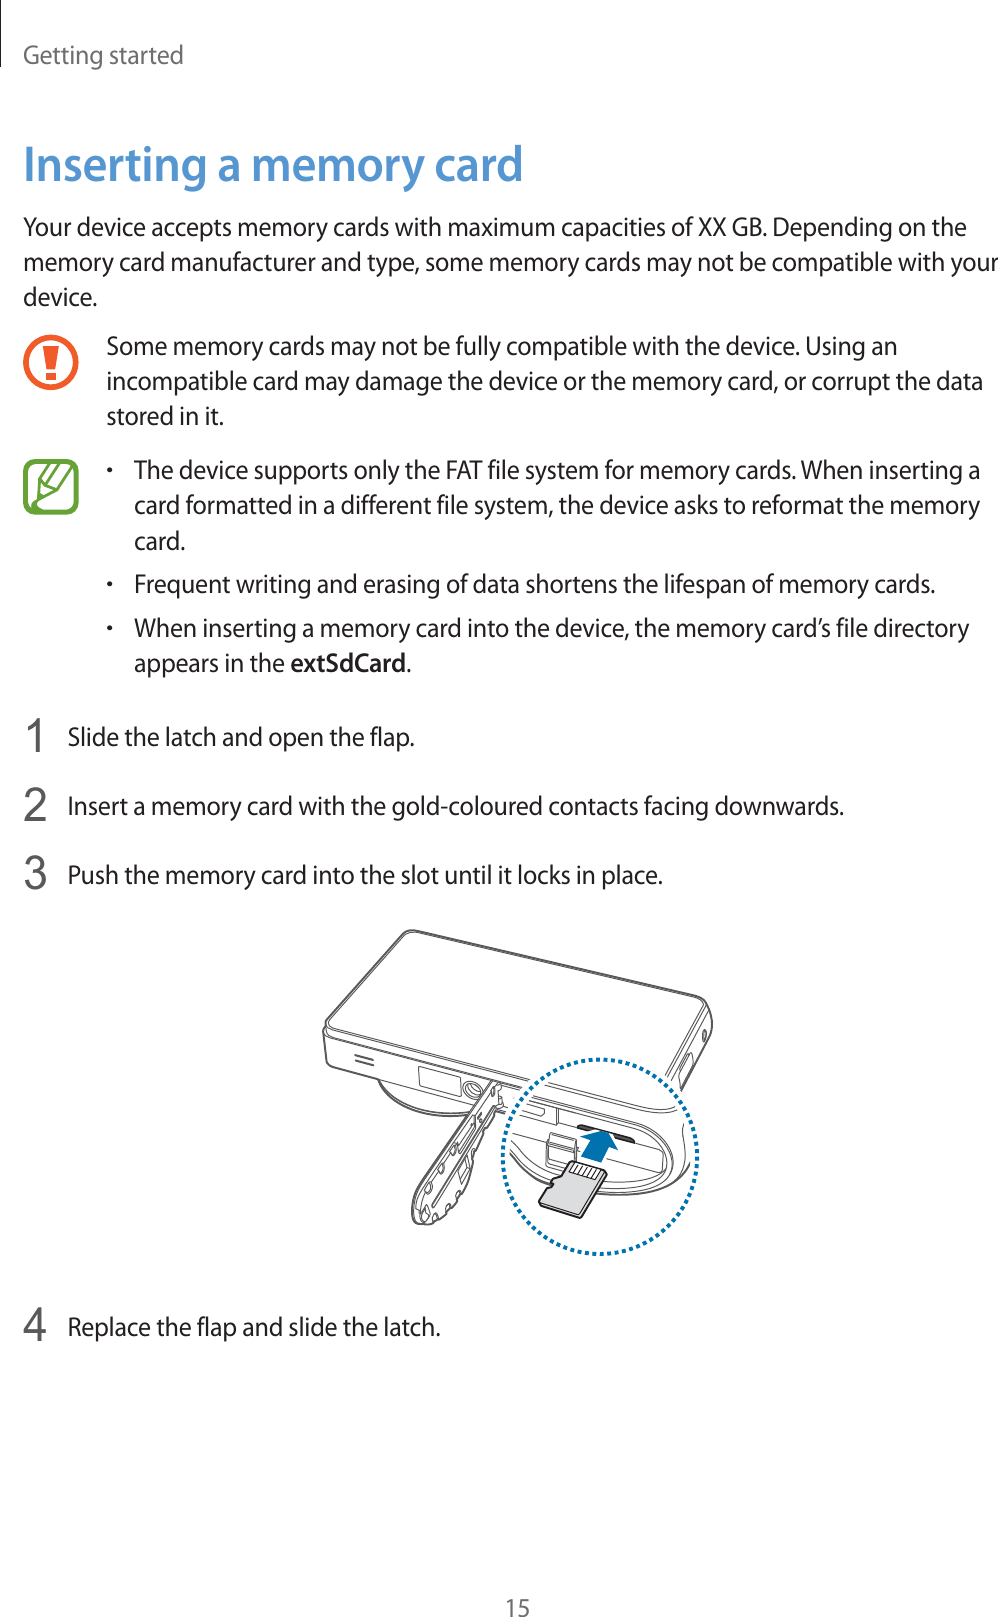 Getting started15Inserting a memory cardYour device accepts memory cards with maximum capacities of XX GB. Depending on the memory card manufacturer and type, some memory cards may not be compatible with your device.Some memory cards may not be fully compatible with the device. Using an incompatible card may damage the device or the memory card, or corrupt the data stored in it.rThe device supports only the FAT file system for memory cards. When inserting a card formatted in a different file system, the device asks to reformat the memory card.rFrequent writing and erasing of data shortens the lifespan of memory cards.rWhen inserting a memory card into the device, the memory card’s file directory appears in the extSdCard.1Slide the latch and open the flap.2Insert a memory card with the gold-coloured contacts facing downwards.3Push the memory card into the slot until it locks in place.4Replace the flap and slide the latch.